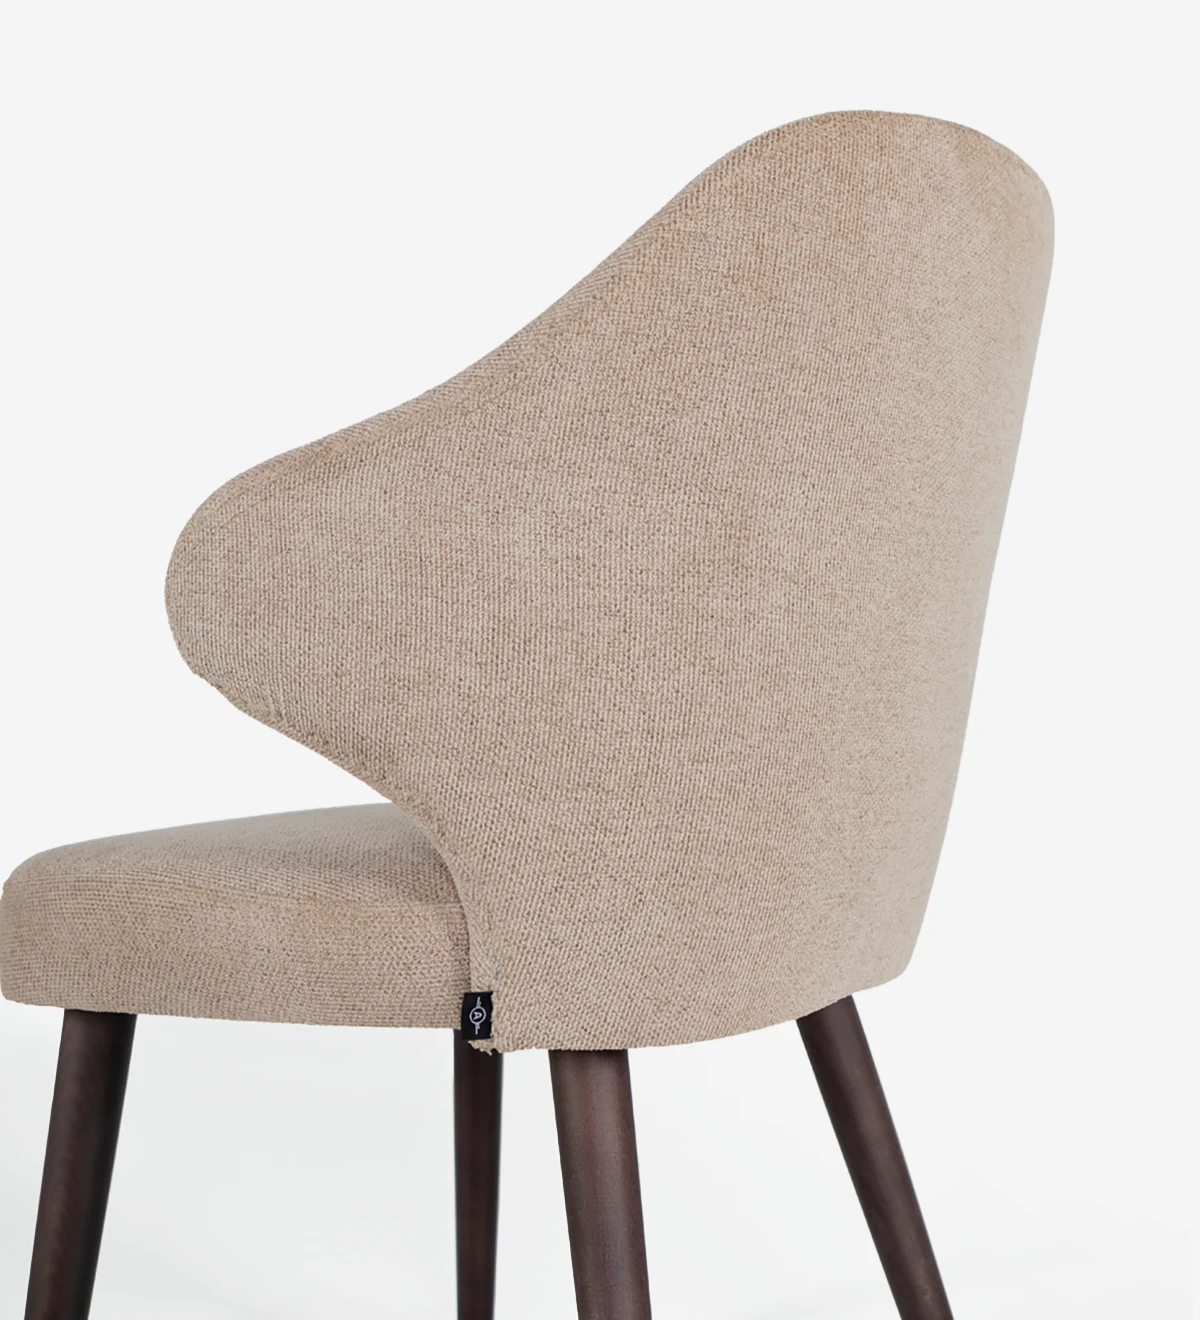 Fabric upholstered chair with dark brown ash wood feet.